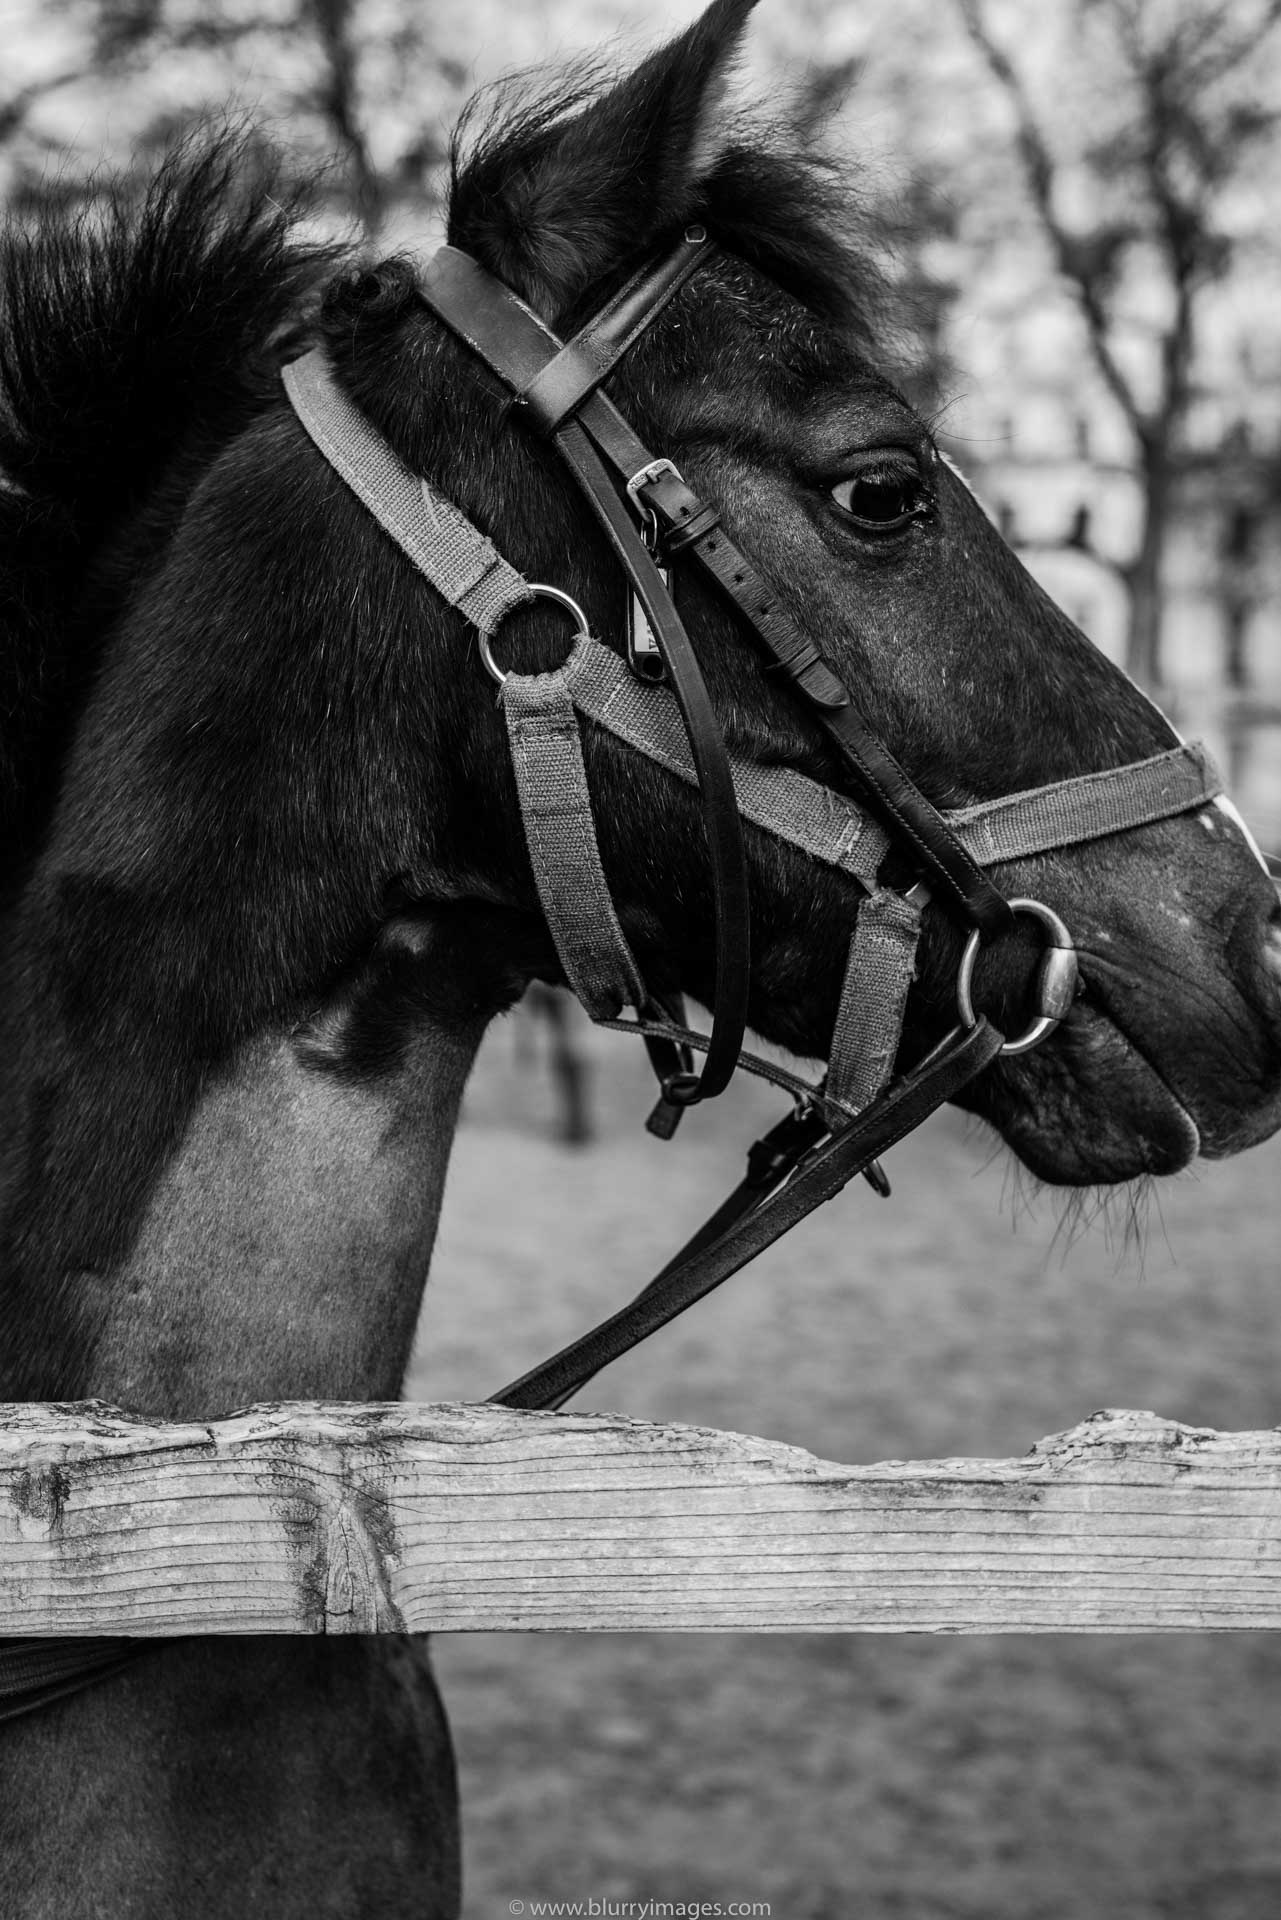 horse, black horse, fence, horse behind the fence, Close-Up, Animal Body Part, Animal Themes, outdoors, one animal